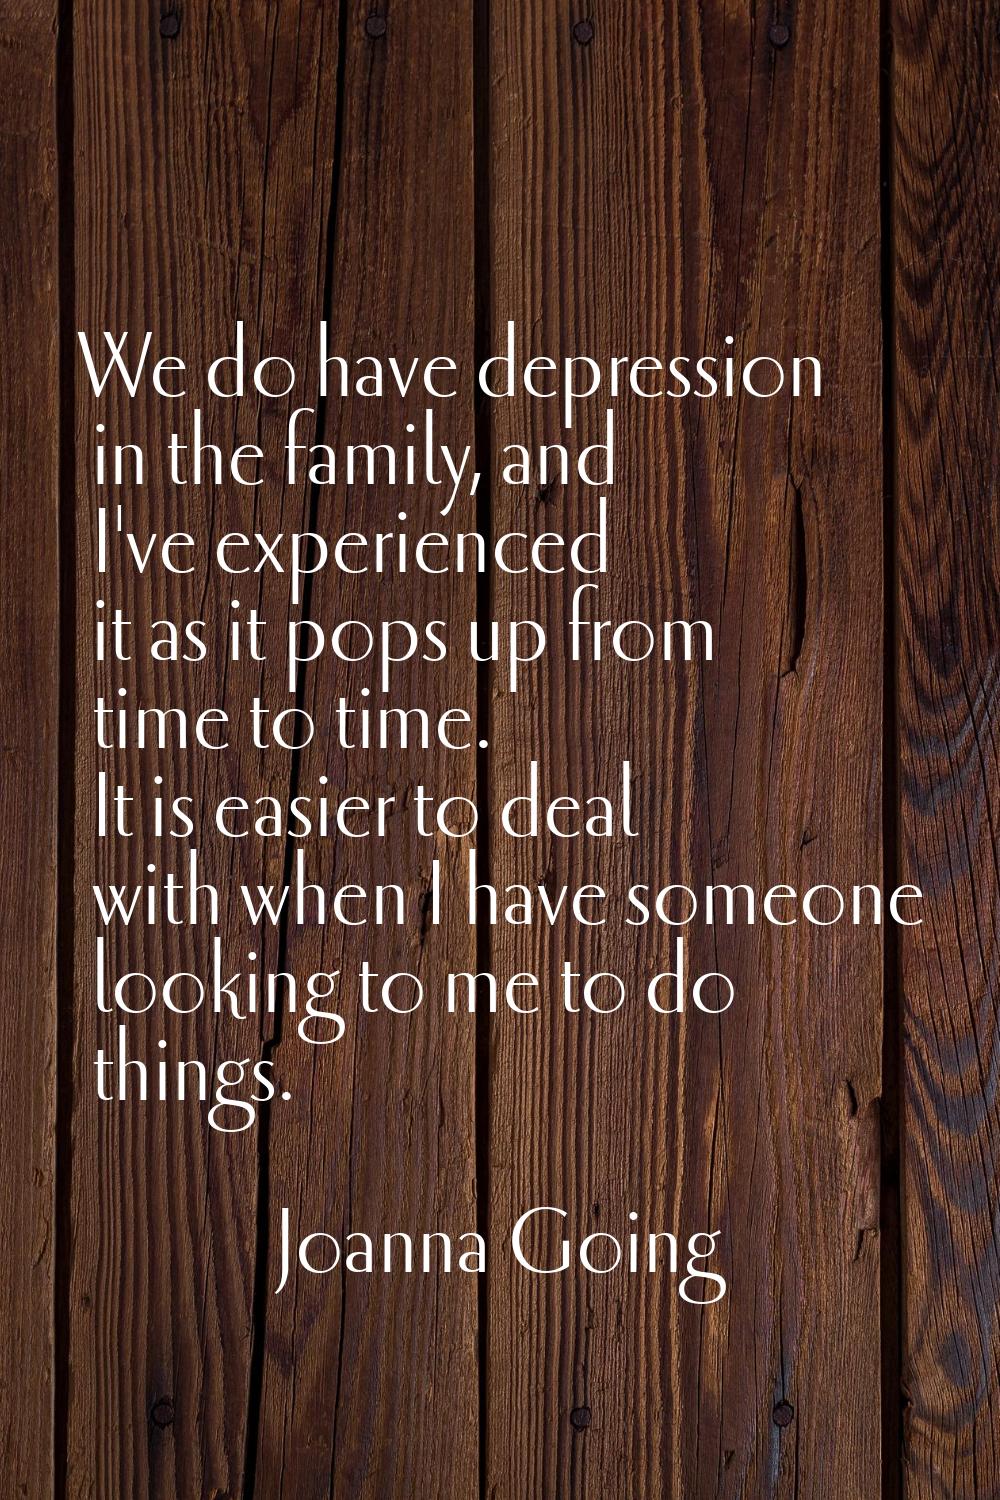 We do have depression in the family, and I've experienced it as it pops up from time to time. It is